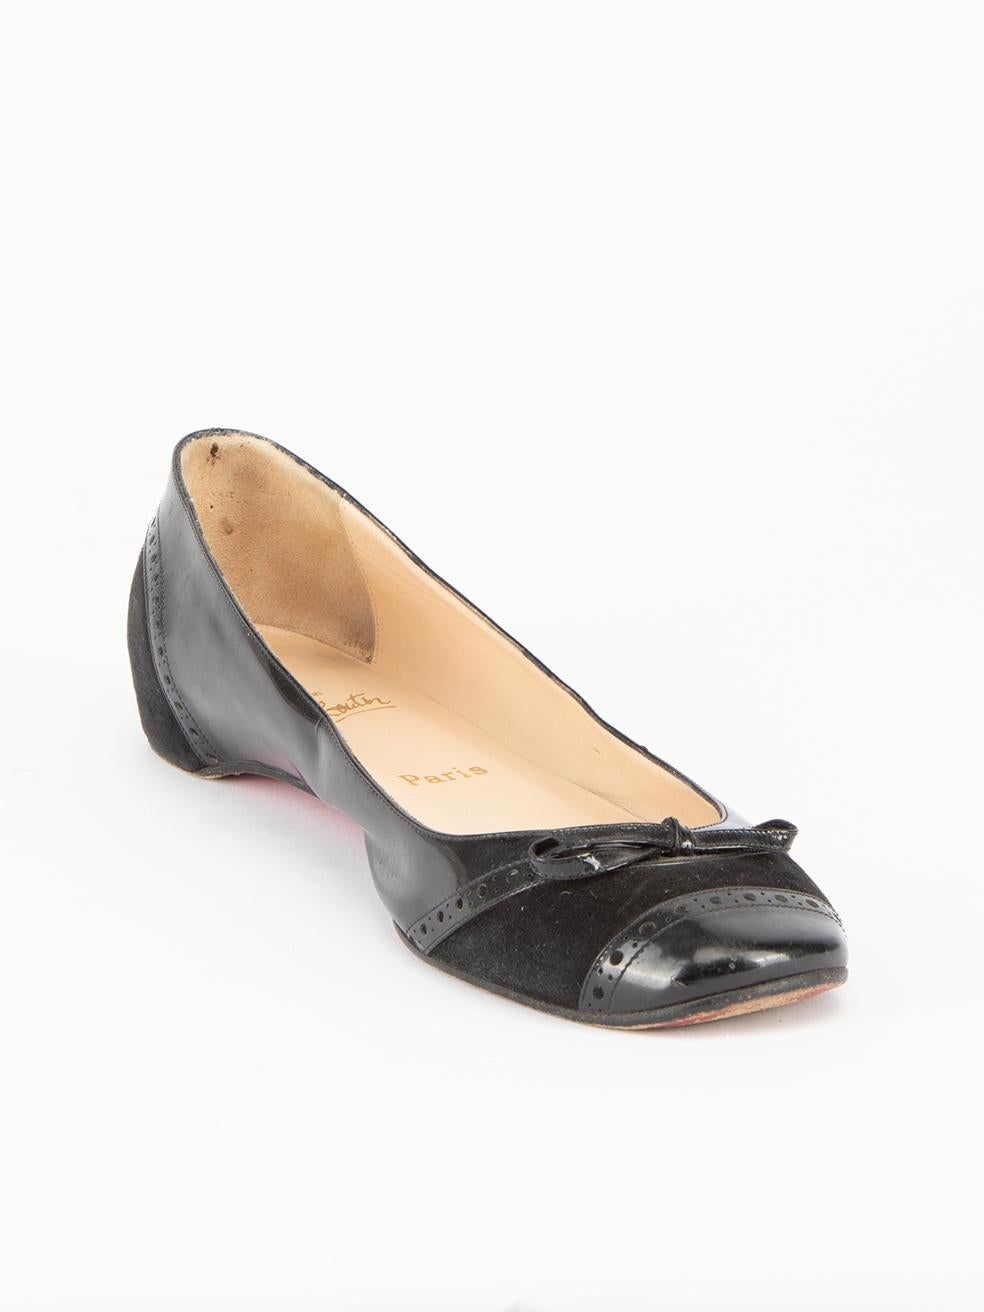 CONDITION is Very good. Minimal wear to flats is evident. Minimal wear to the suede and leather exterior. There is visible wear to the outsole and very minimal scuffs around the rim of the right shoe on this used Christian Louboutin designer resale